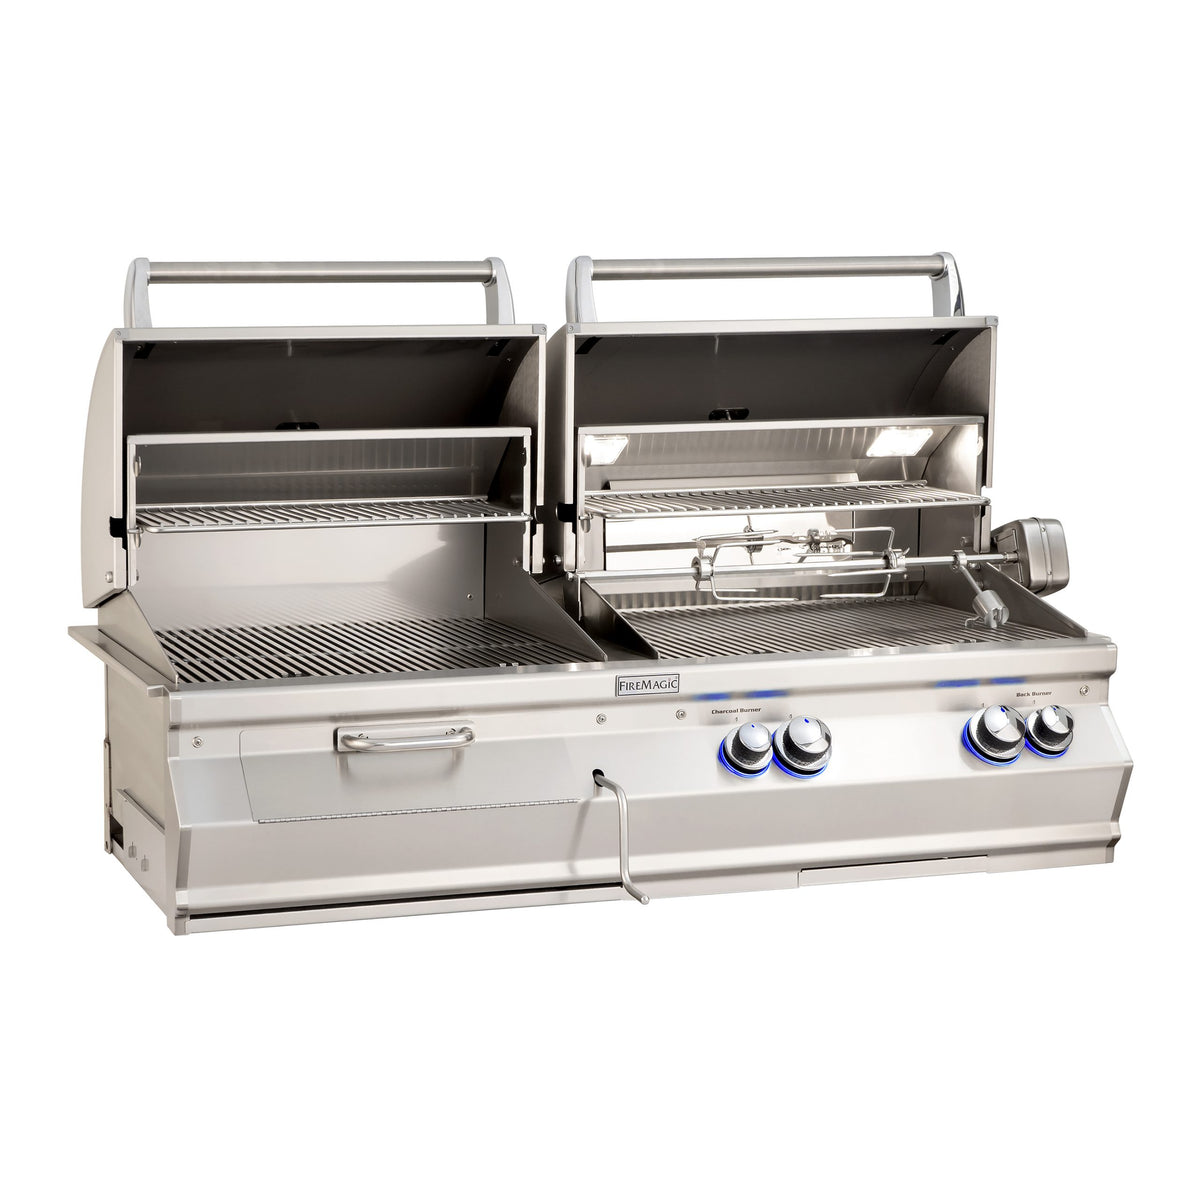 Fire Magic Aurora A830i Gas/Charcoal Combo Built-In Grill with Analog Thermometer